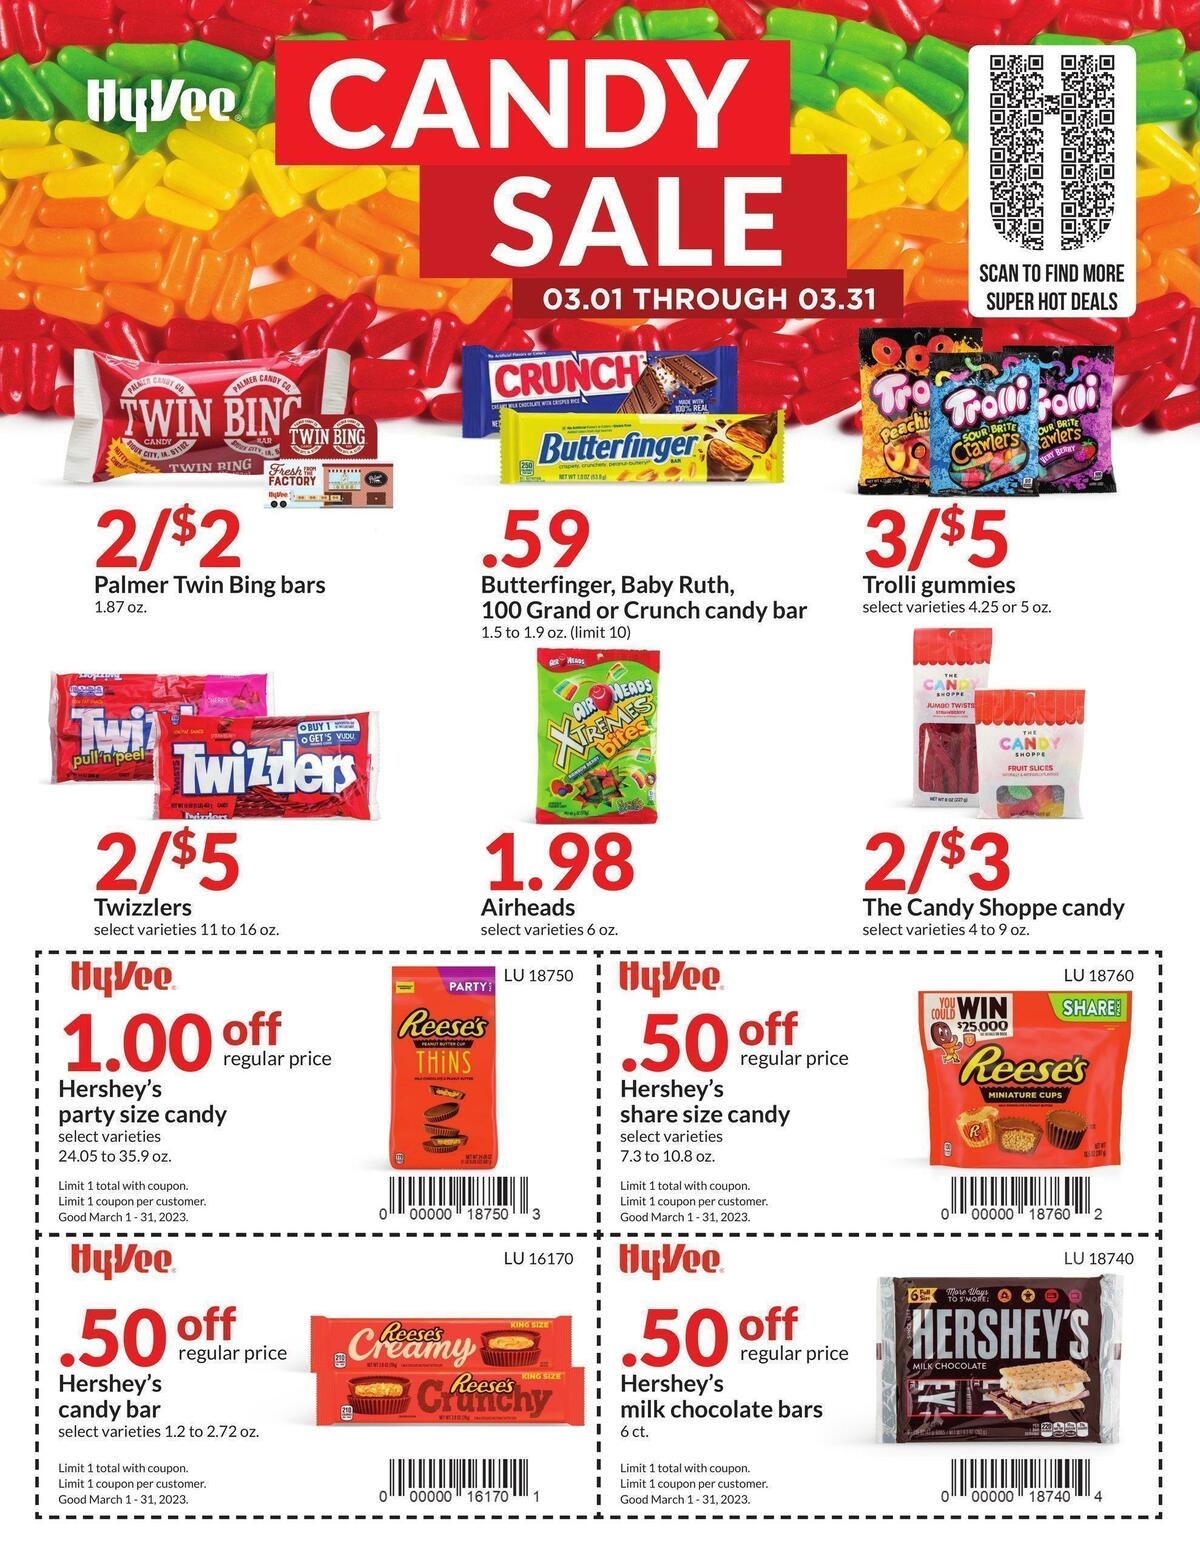 HyVee Candy Sale Deals & Ads from March 1